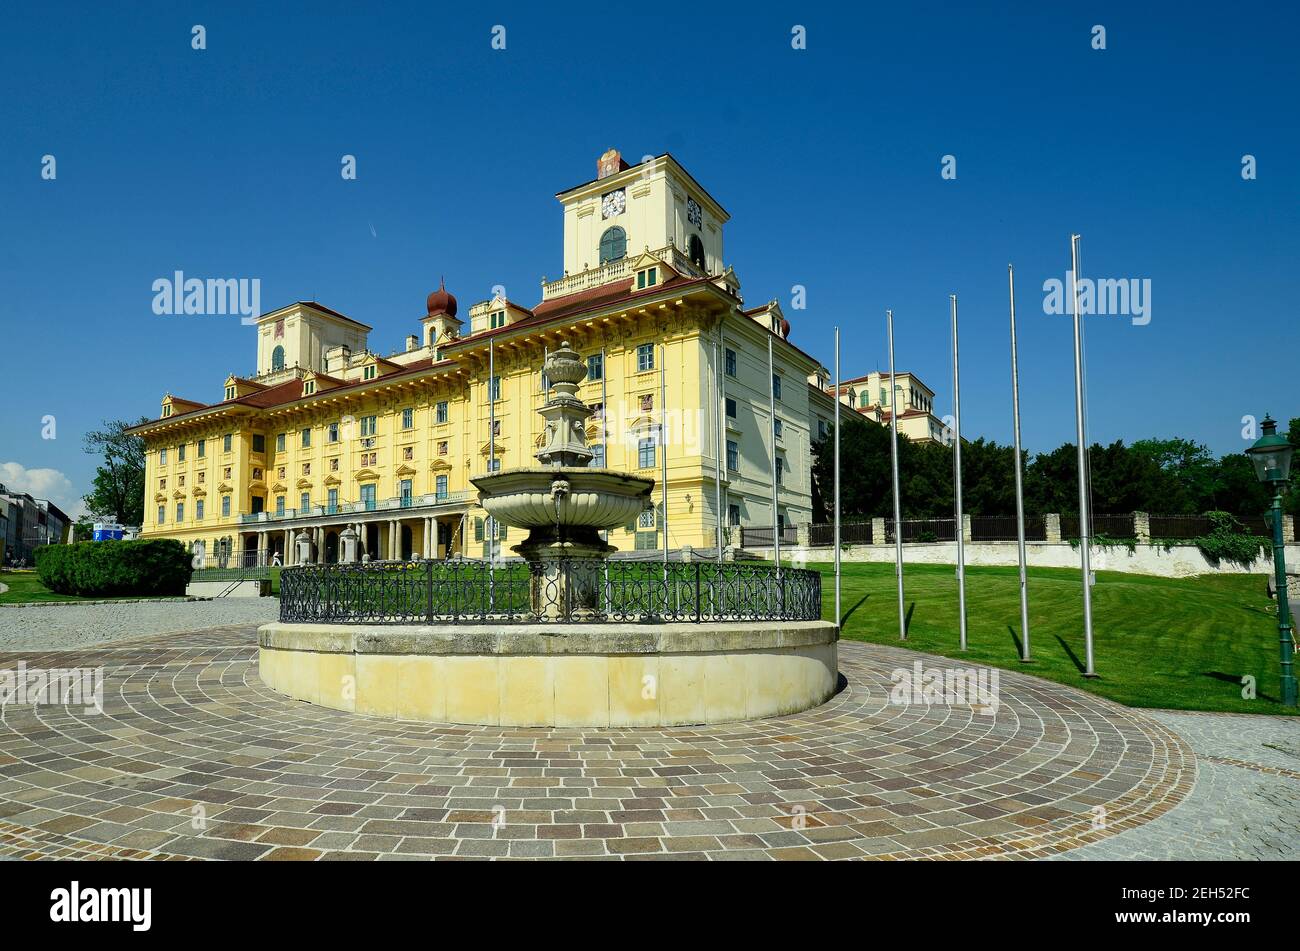 Eisenstadt, Austria - May 24th 2007: Castle Esterhazy preferred place for exhibitions and concerts and landmark of the capital of Burgenland Stock Photo